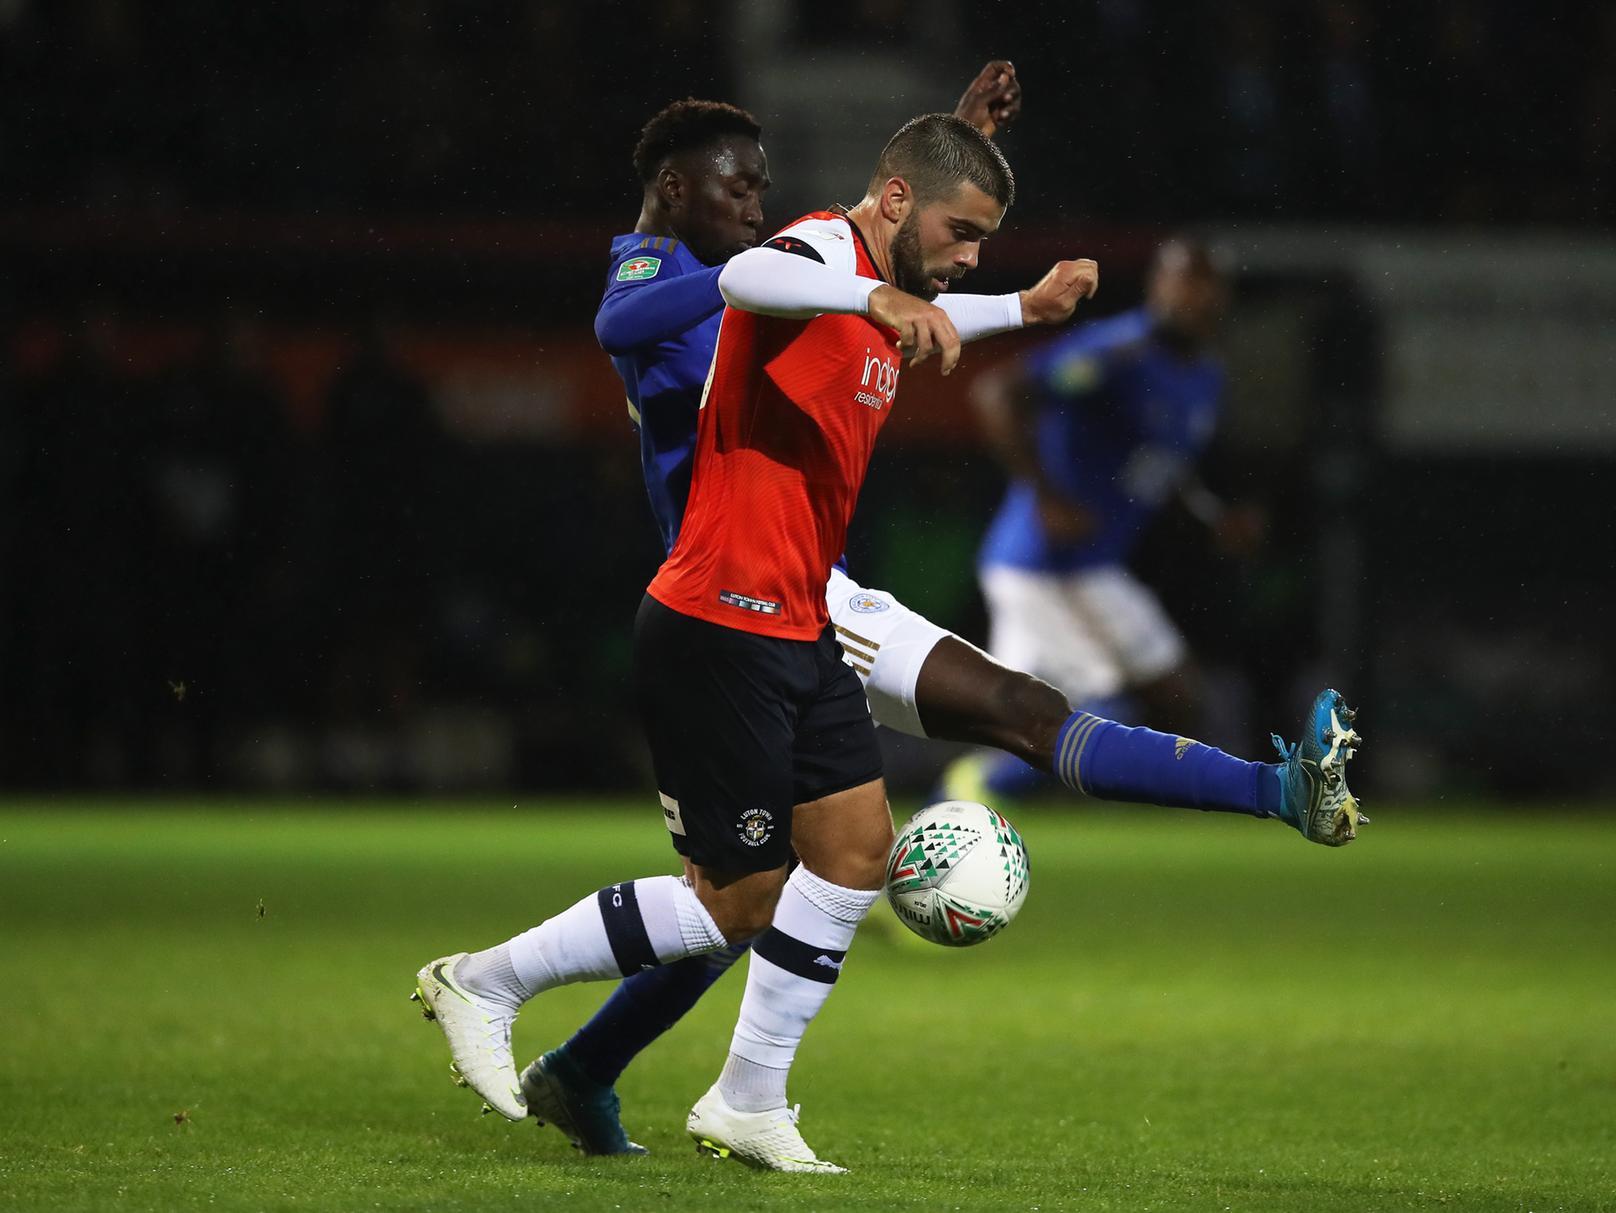 Portsmouth and Peterborough United are two sides understood to be interested in Luton Town's Elliot Lee, who has barely featured for the Hatters so far this season. (Football League World)